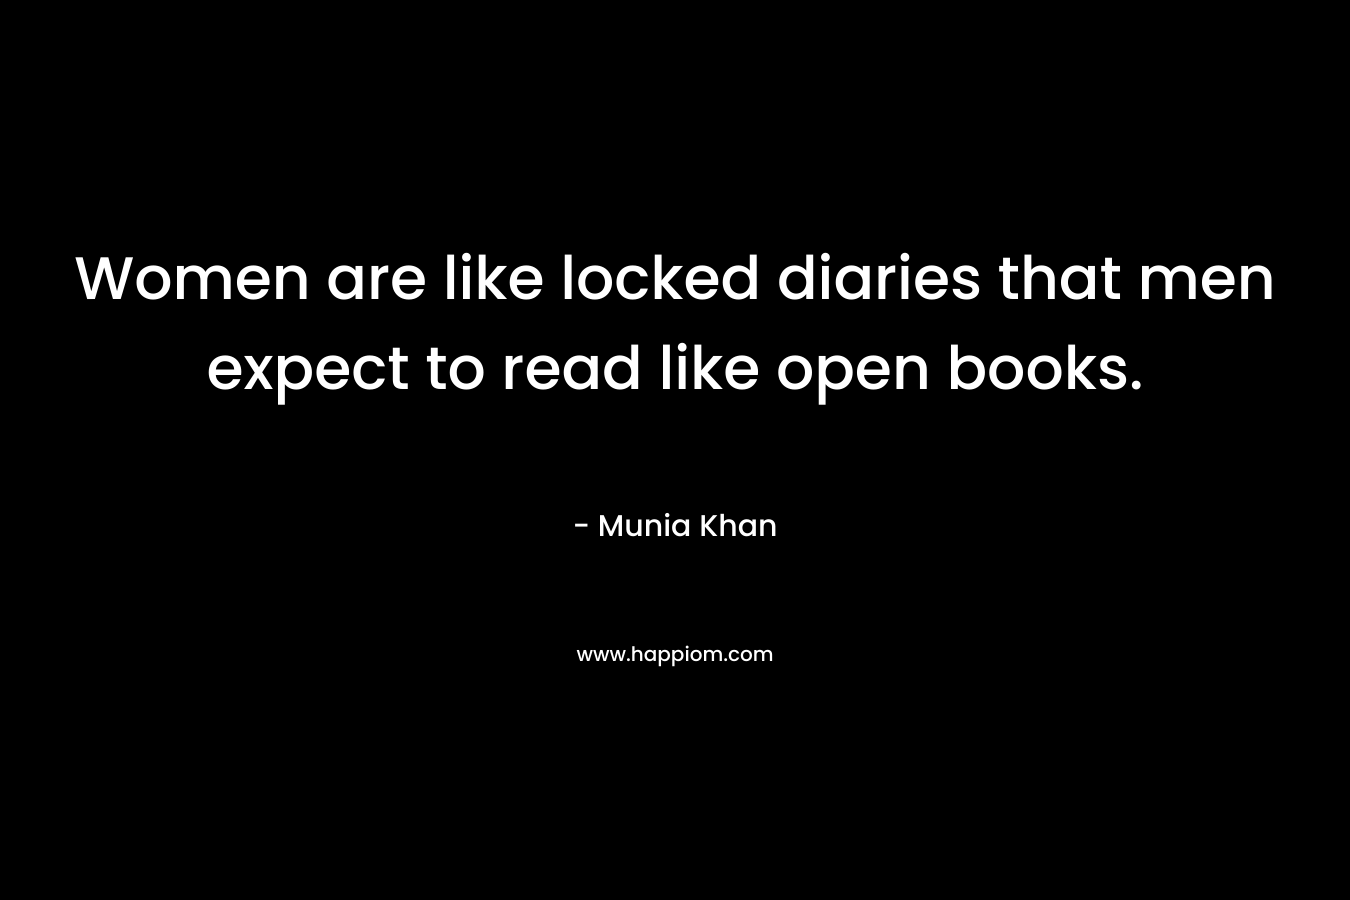 Women are like locked diaries that men expect to read like open books.